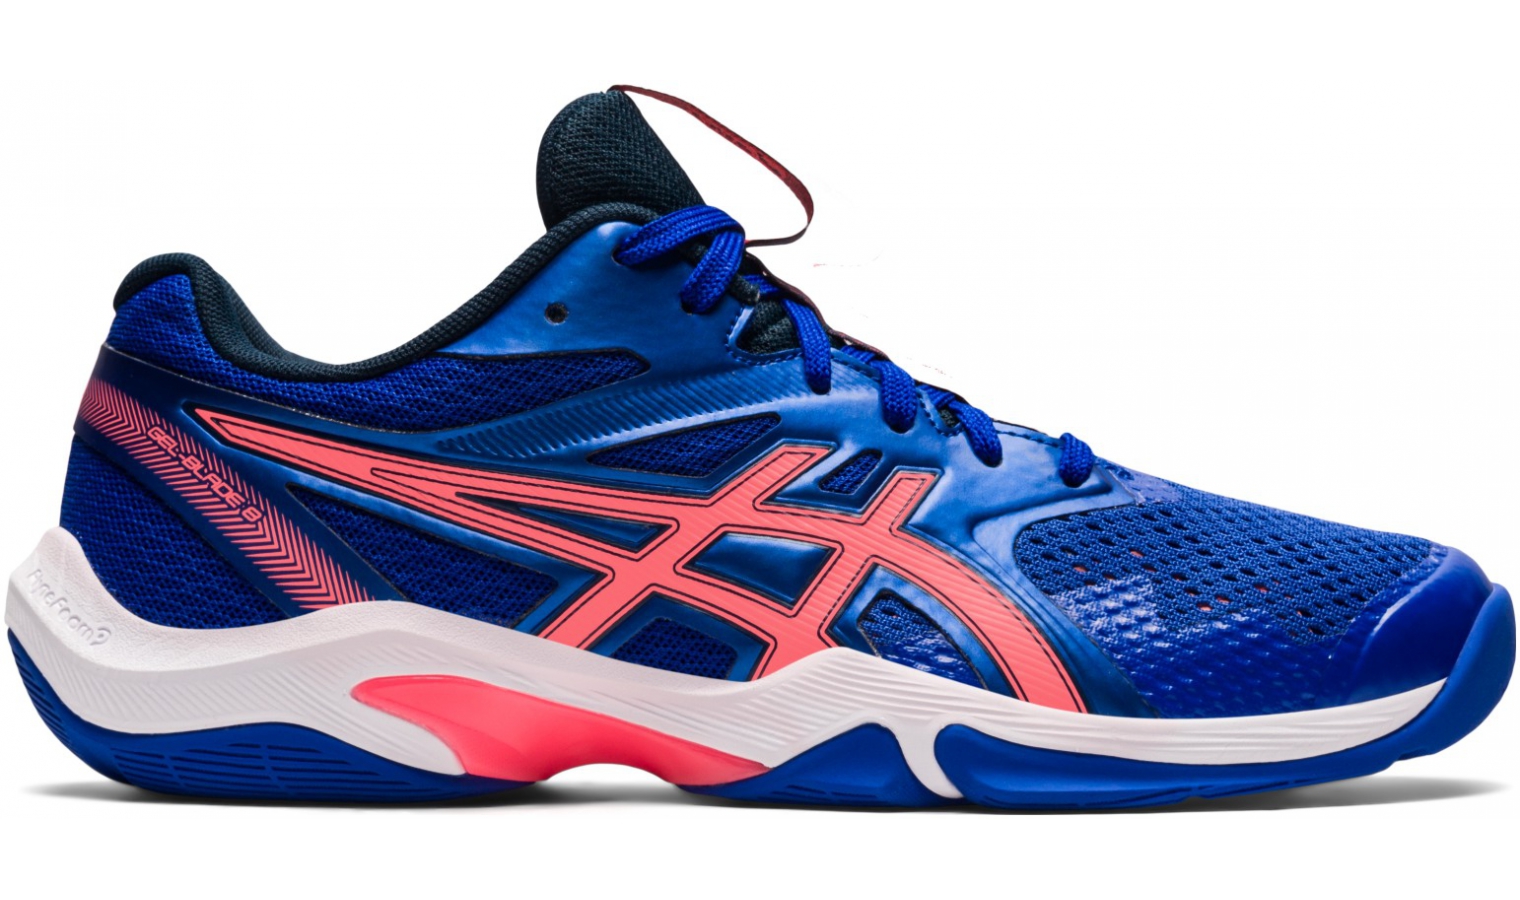 Womens indoor shoes Asics GEL-BLADE 8 W | AD Sport.store